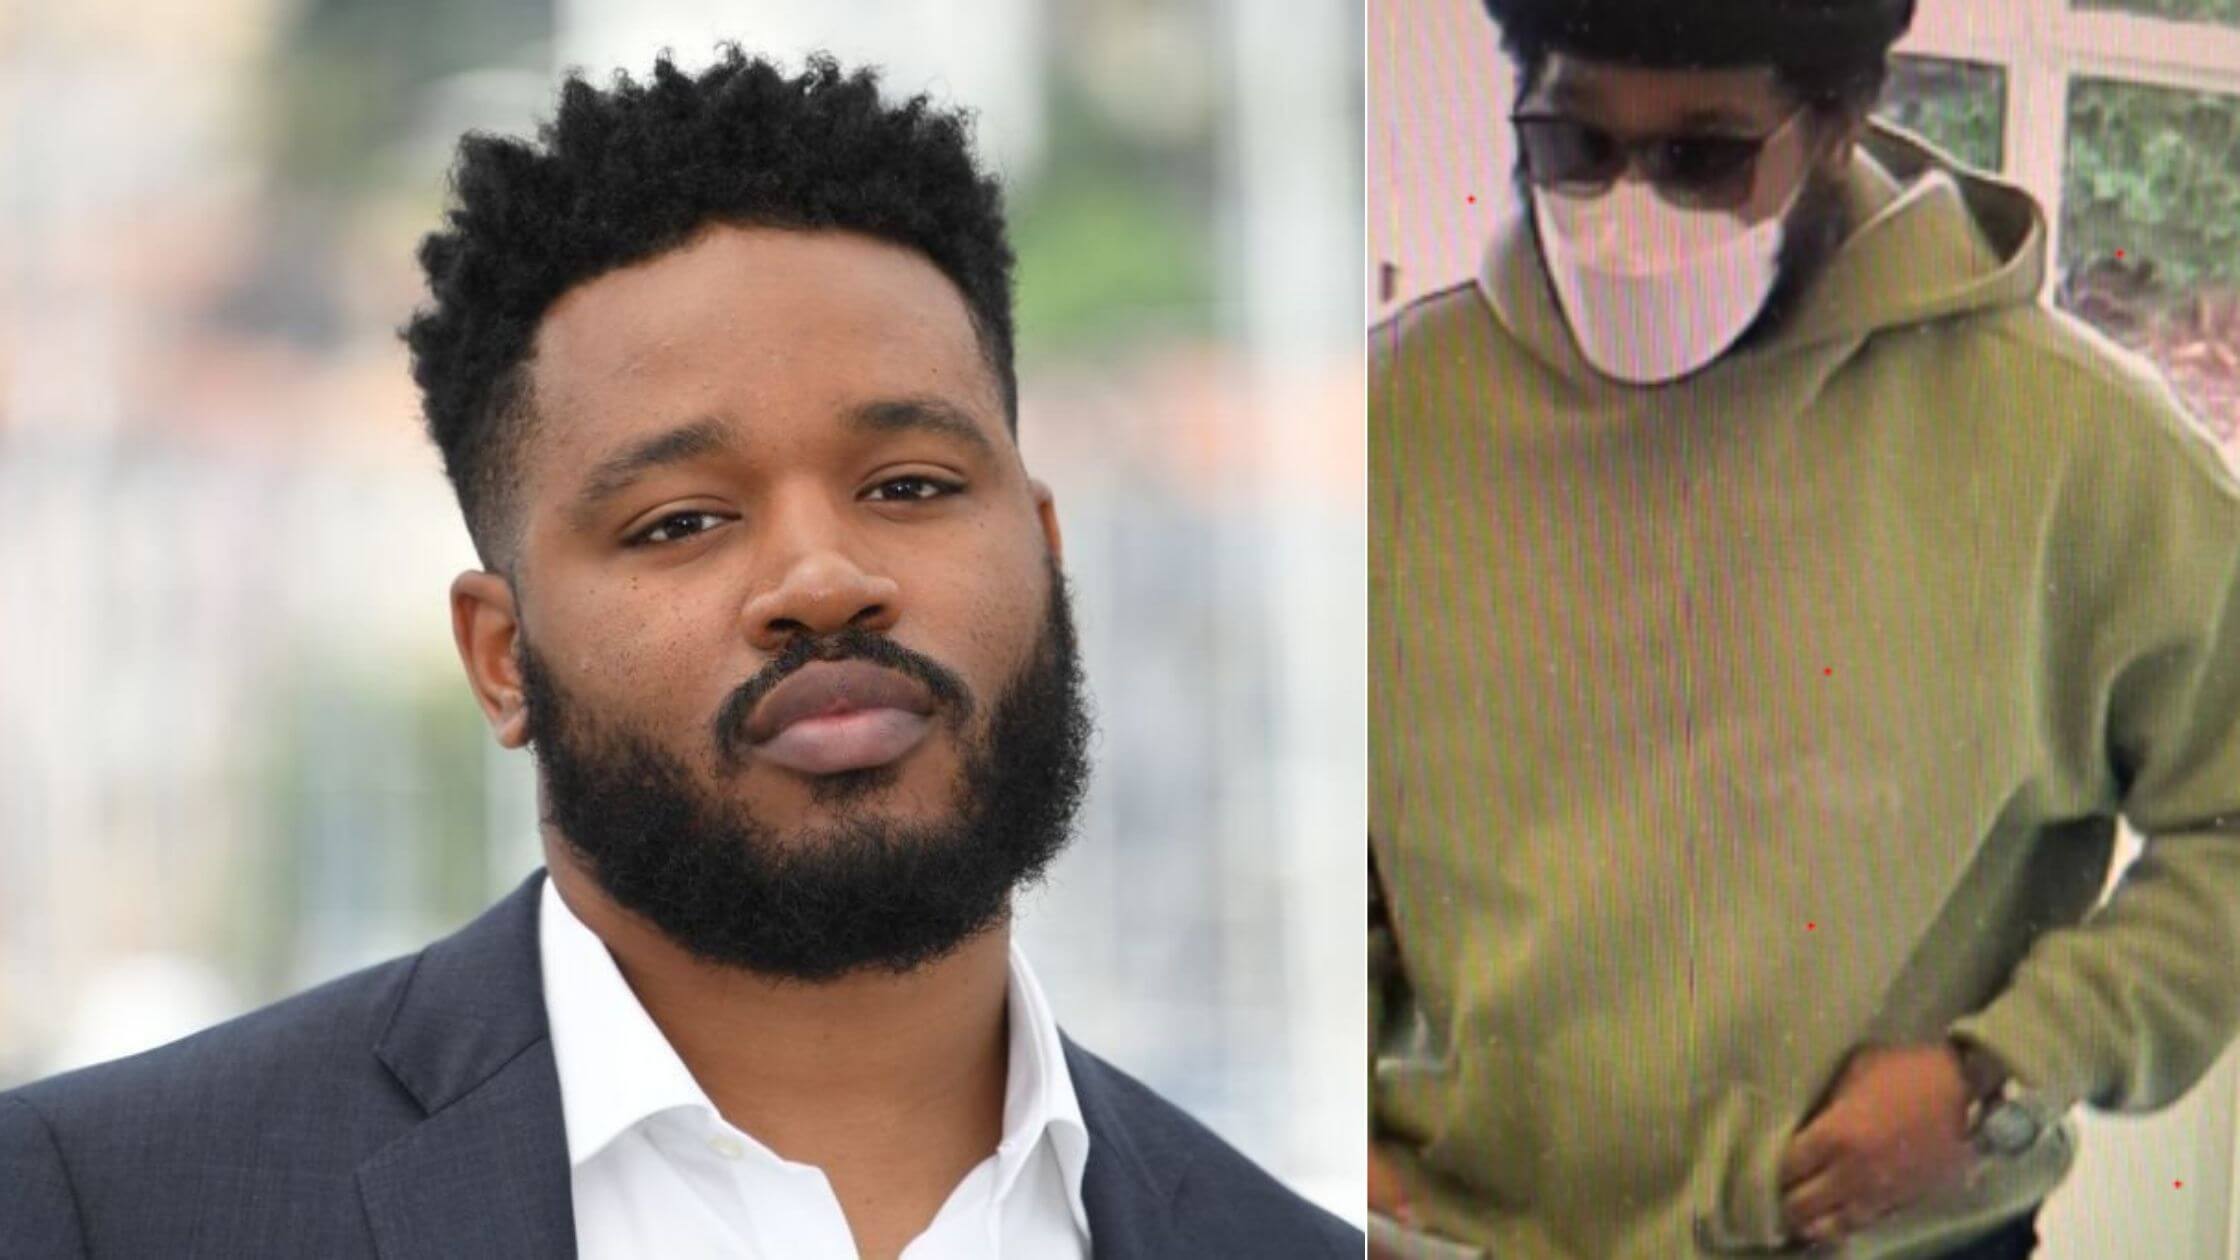 Oh-No-Police-Officials-Put-Handcuffs-On-Black-Panthers-Director-Ryan-Coogler-After-Mistaking-Him-For-A-Bank-Robber